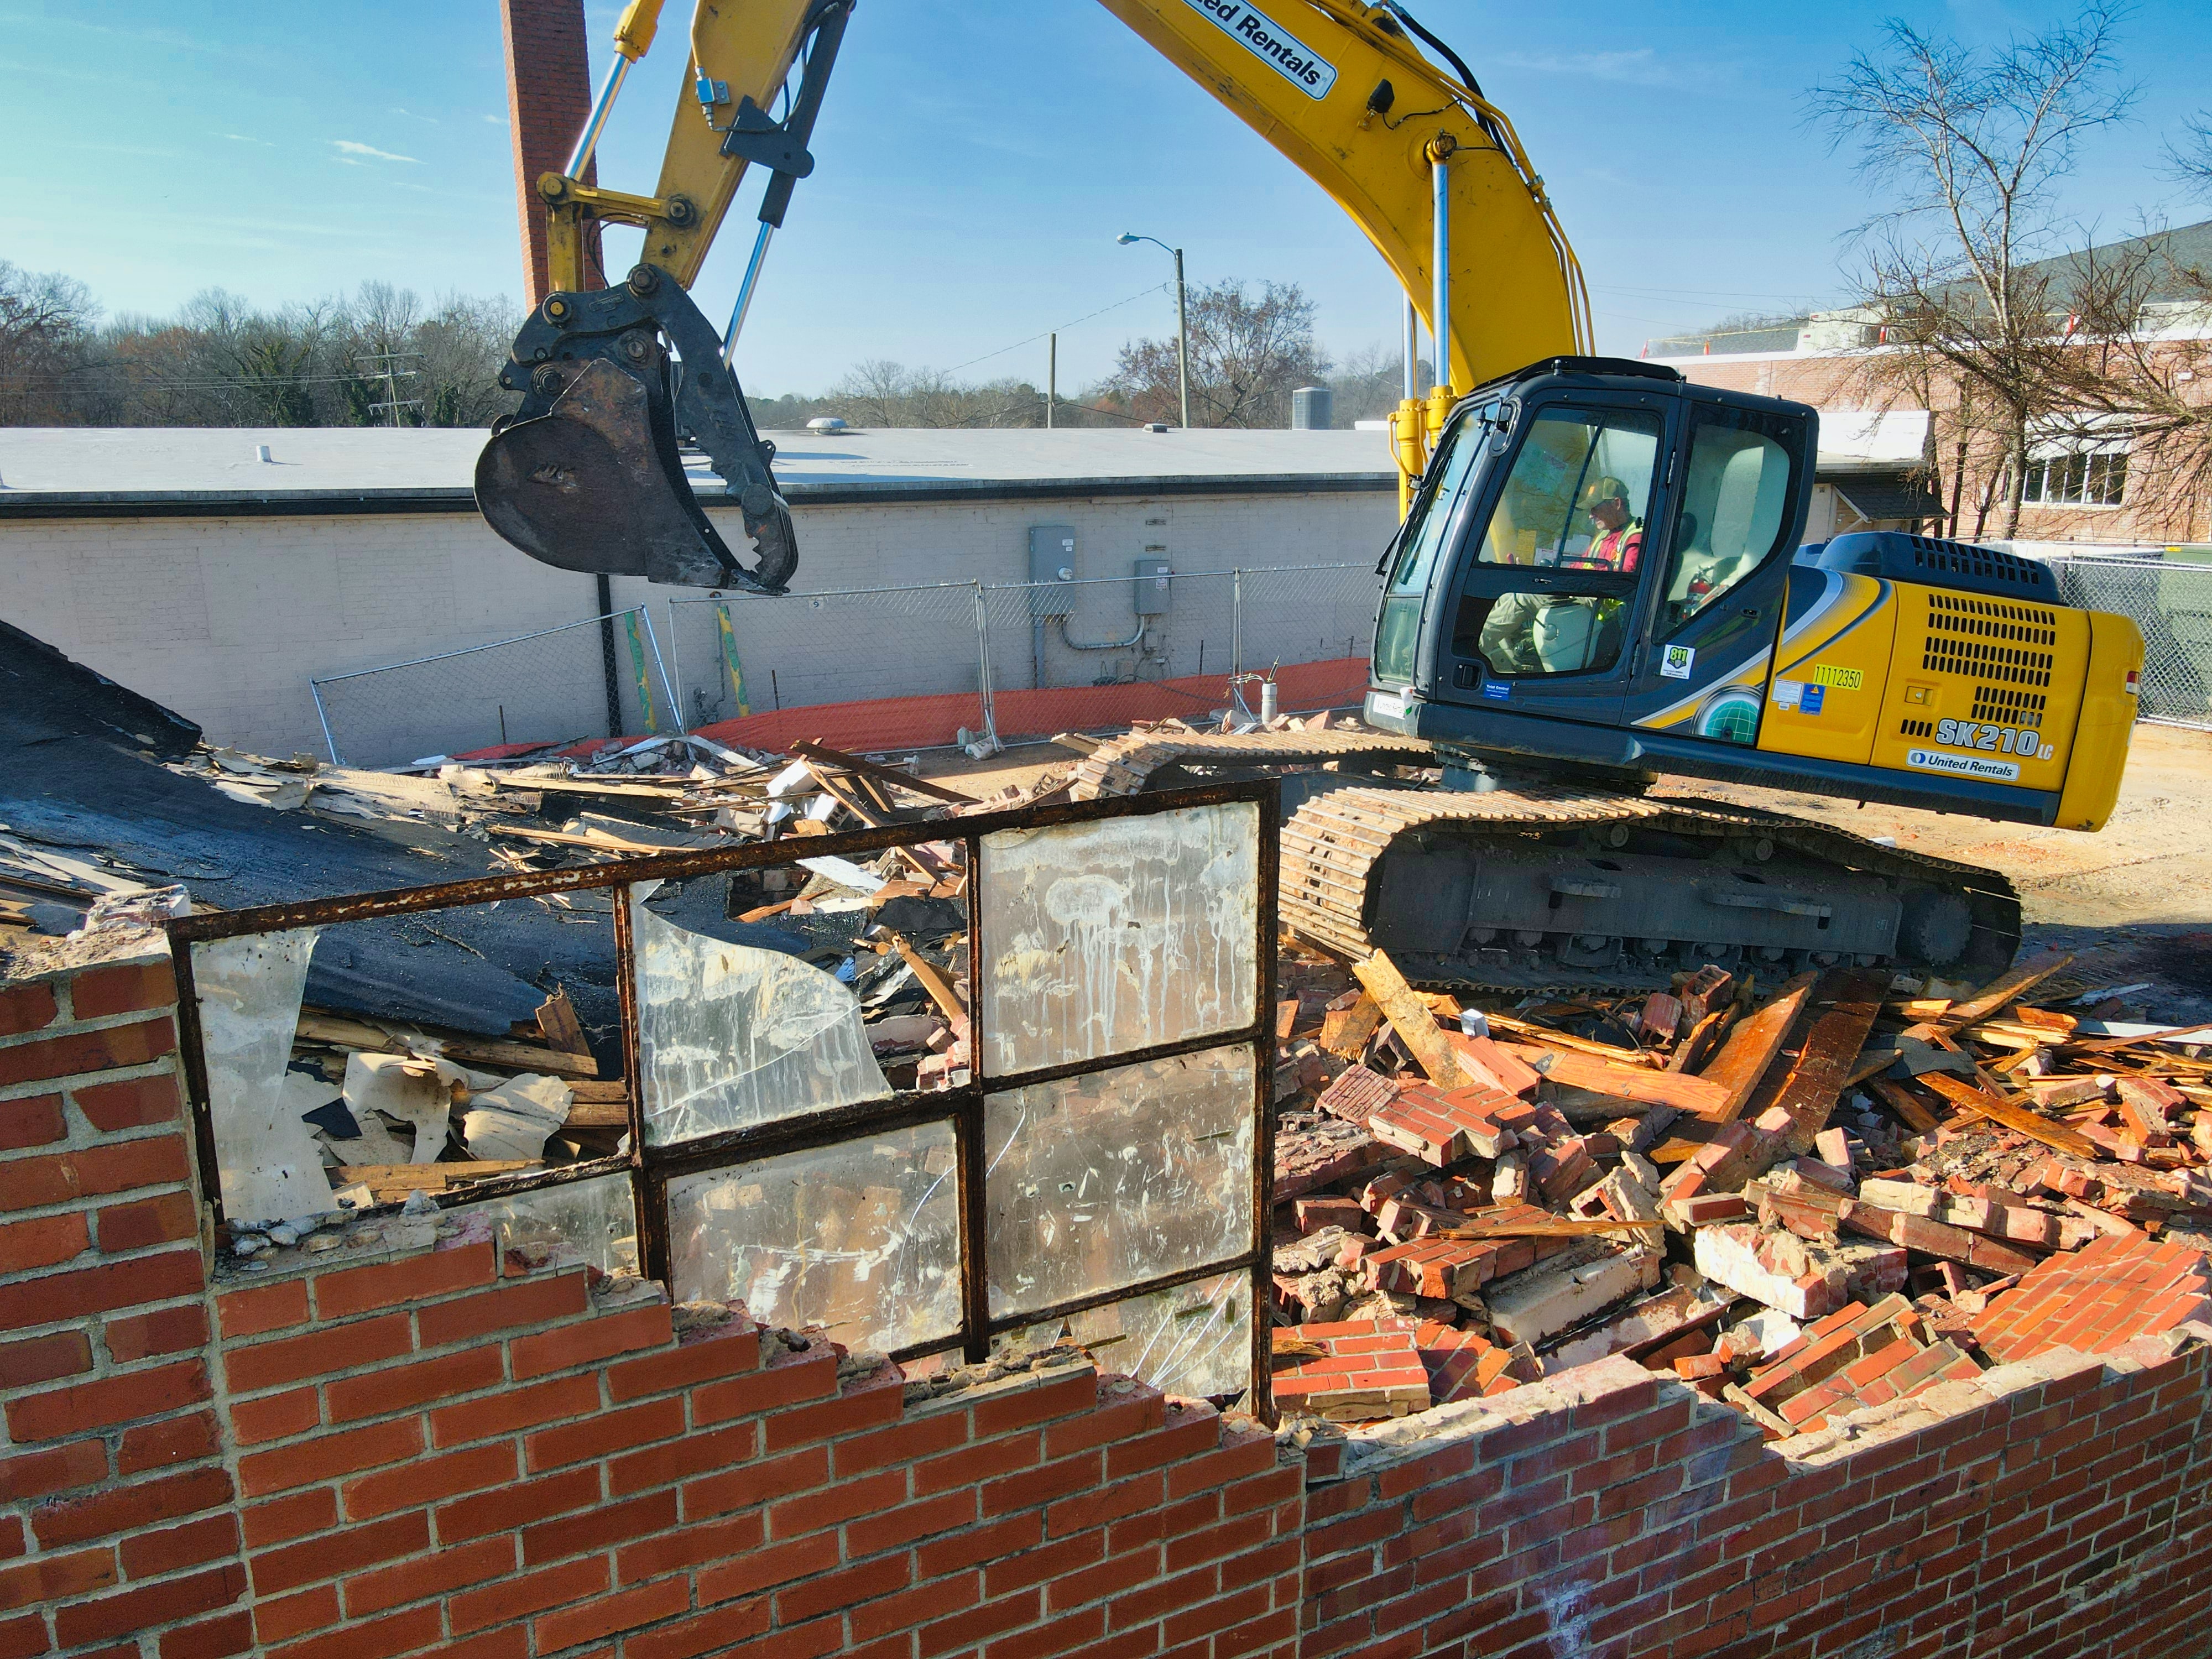 Demolition Guide: from waste management to circular materials stock management